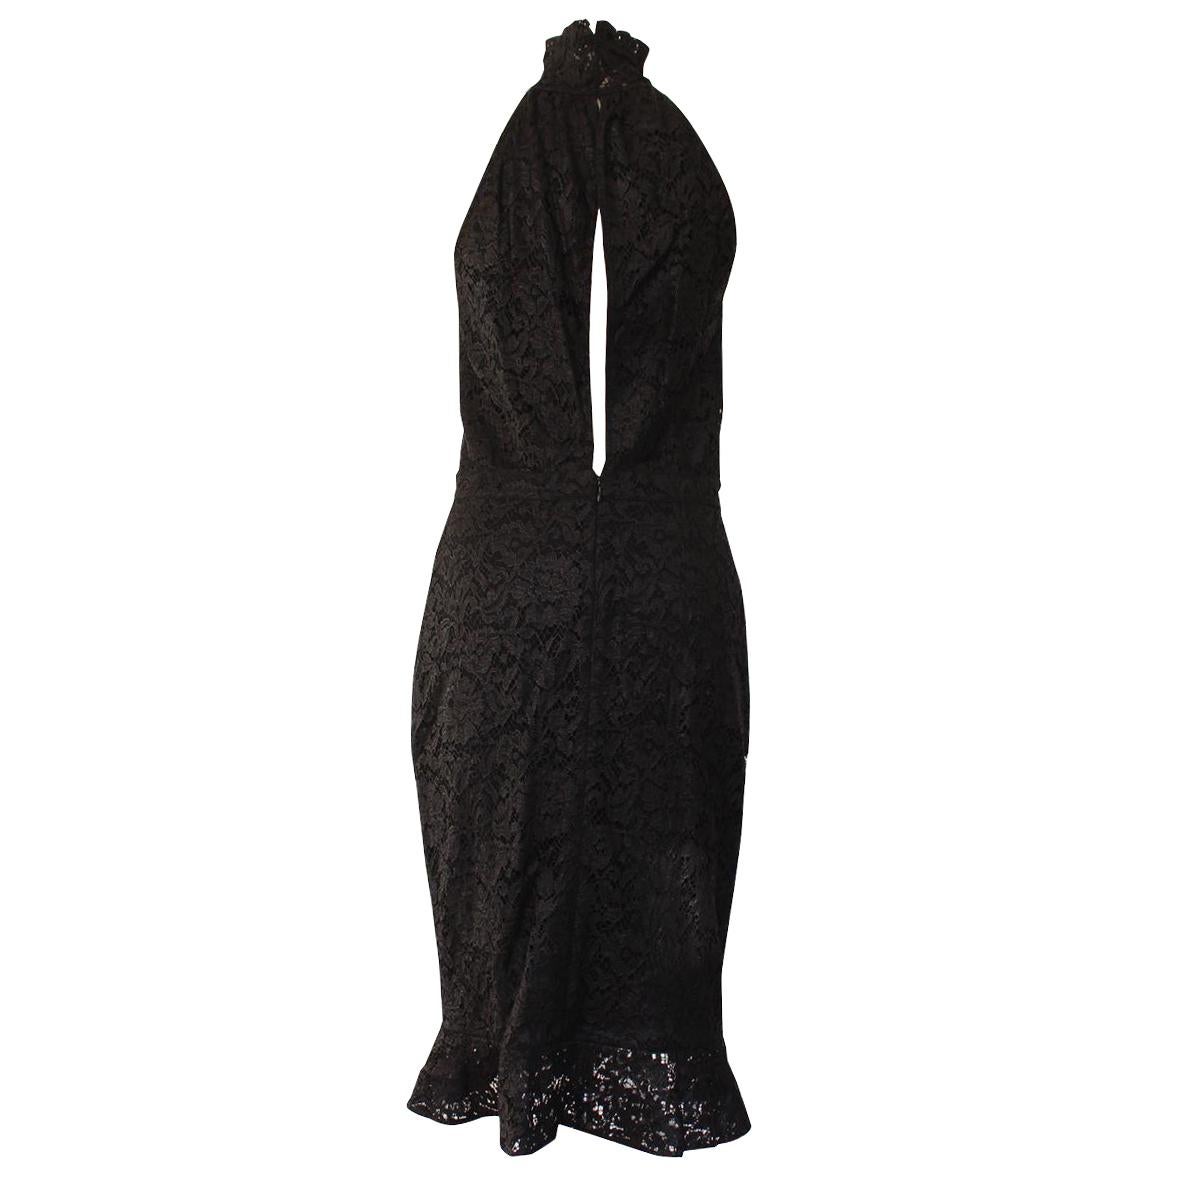 Very chic dress by Altuzarra
Lace
Black color
Opening on front and back
Total length cm 115 (45.2 inches)
Worldwide express shipping included in the price !